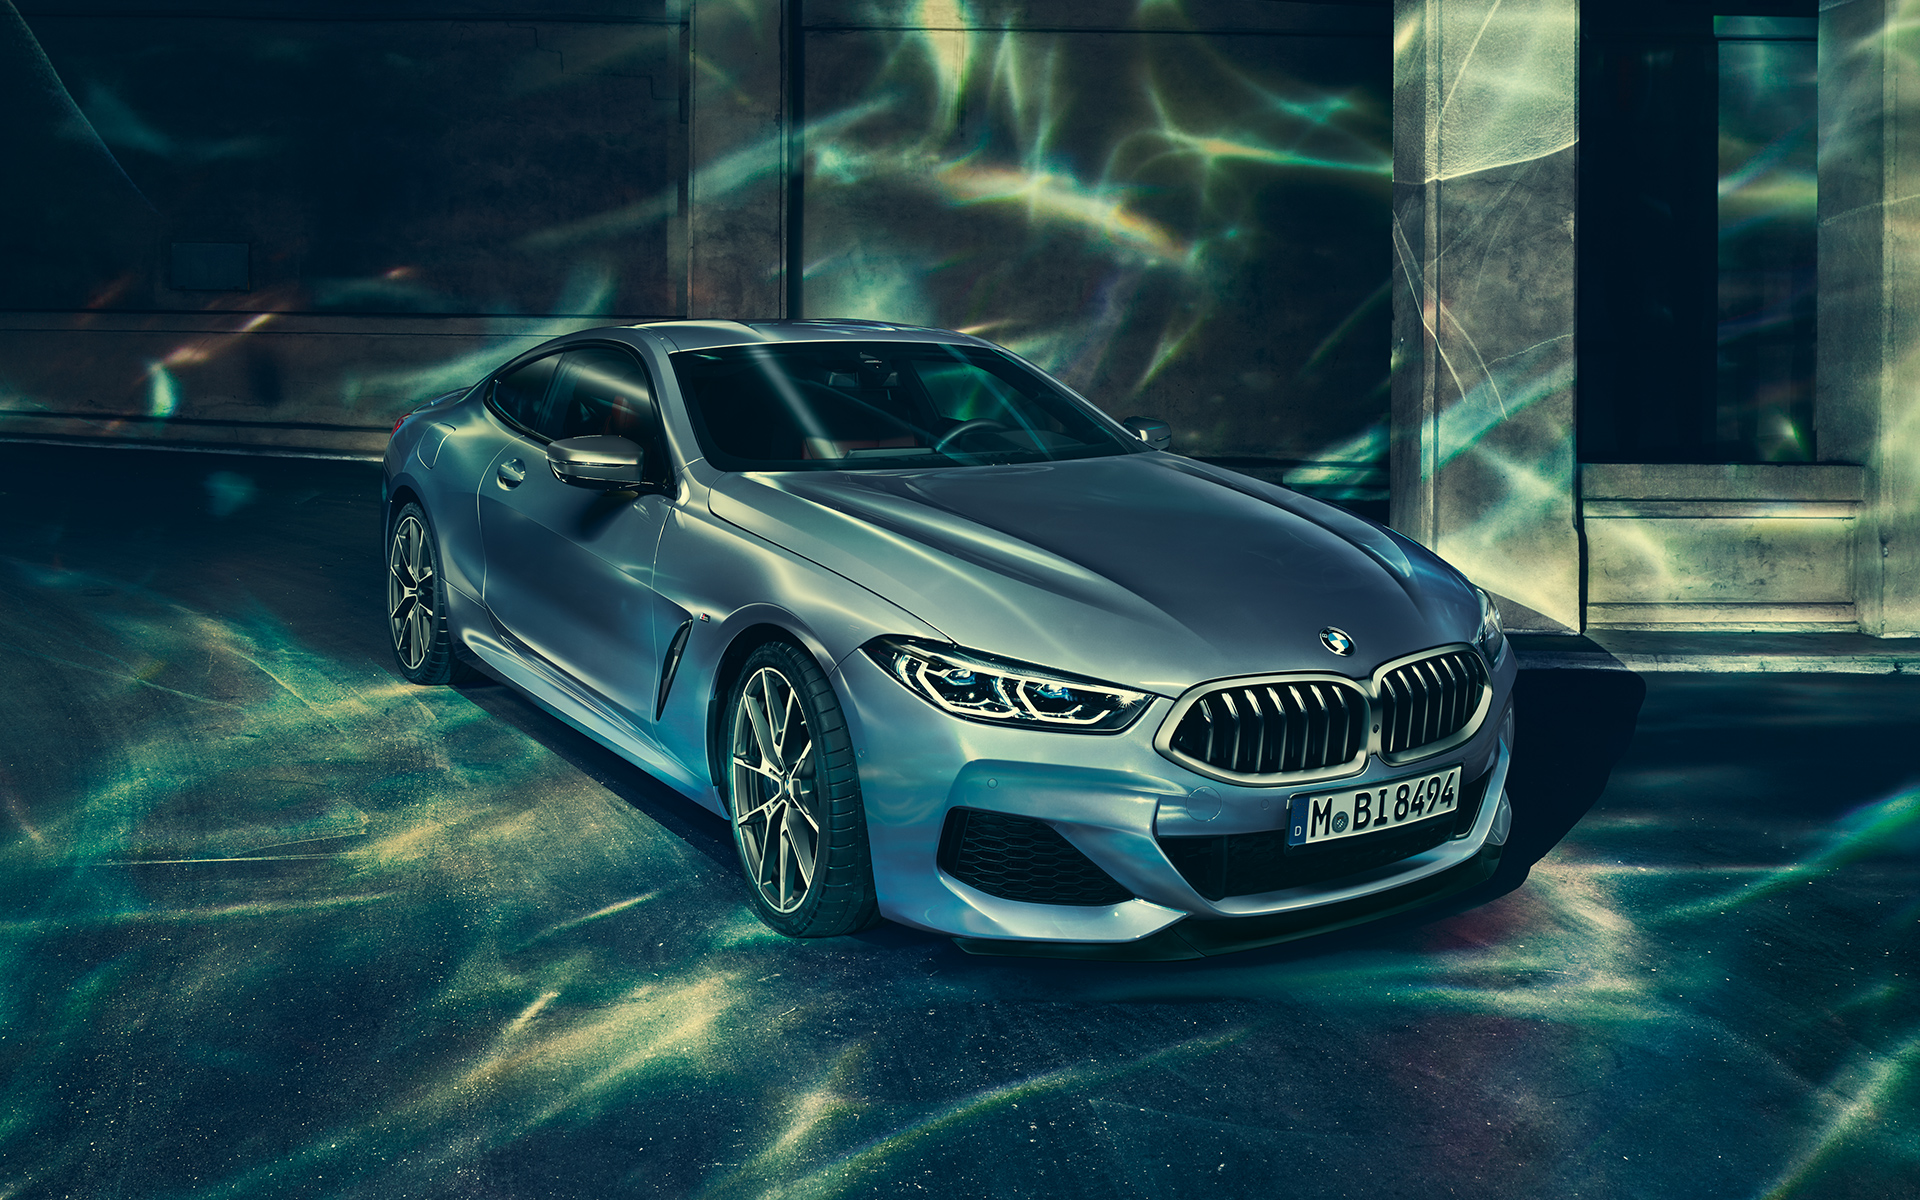 THE 8: Image & Videos of the BMW 8 Series Coupé